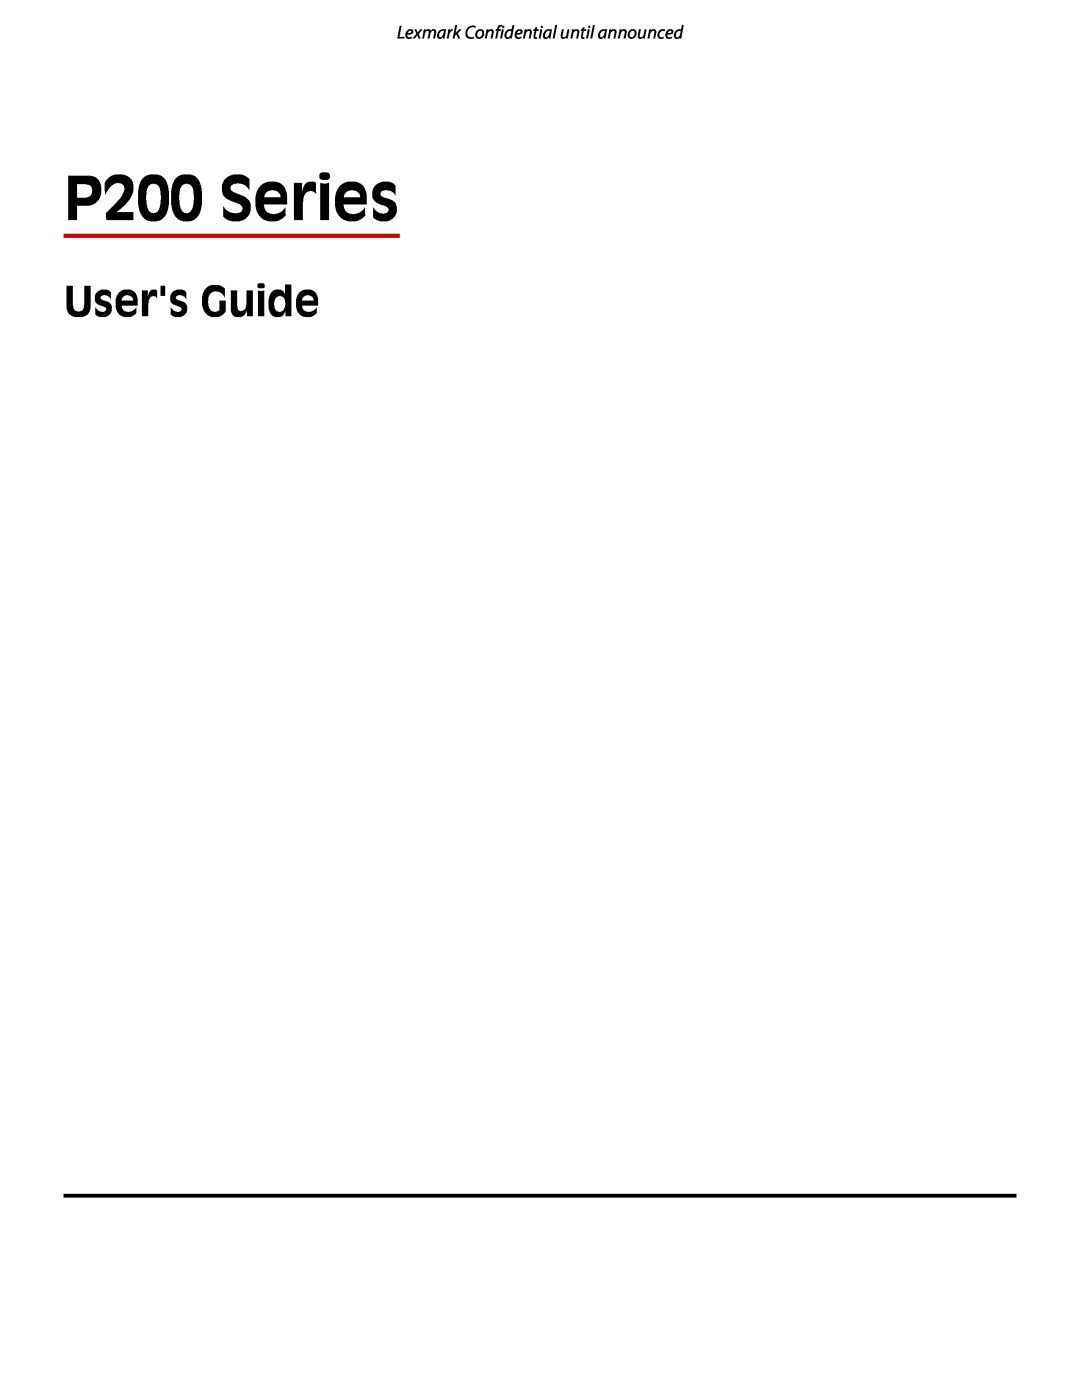 Lexmark manual Users Guide, Lexmark Confidential until announced, P200 Series 